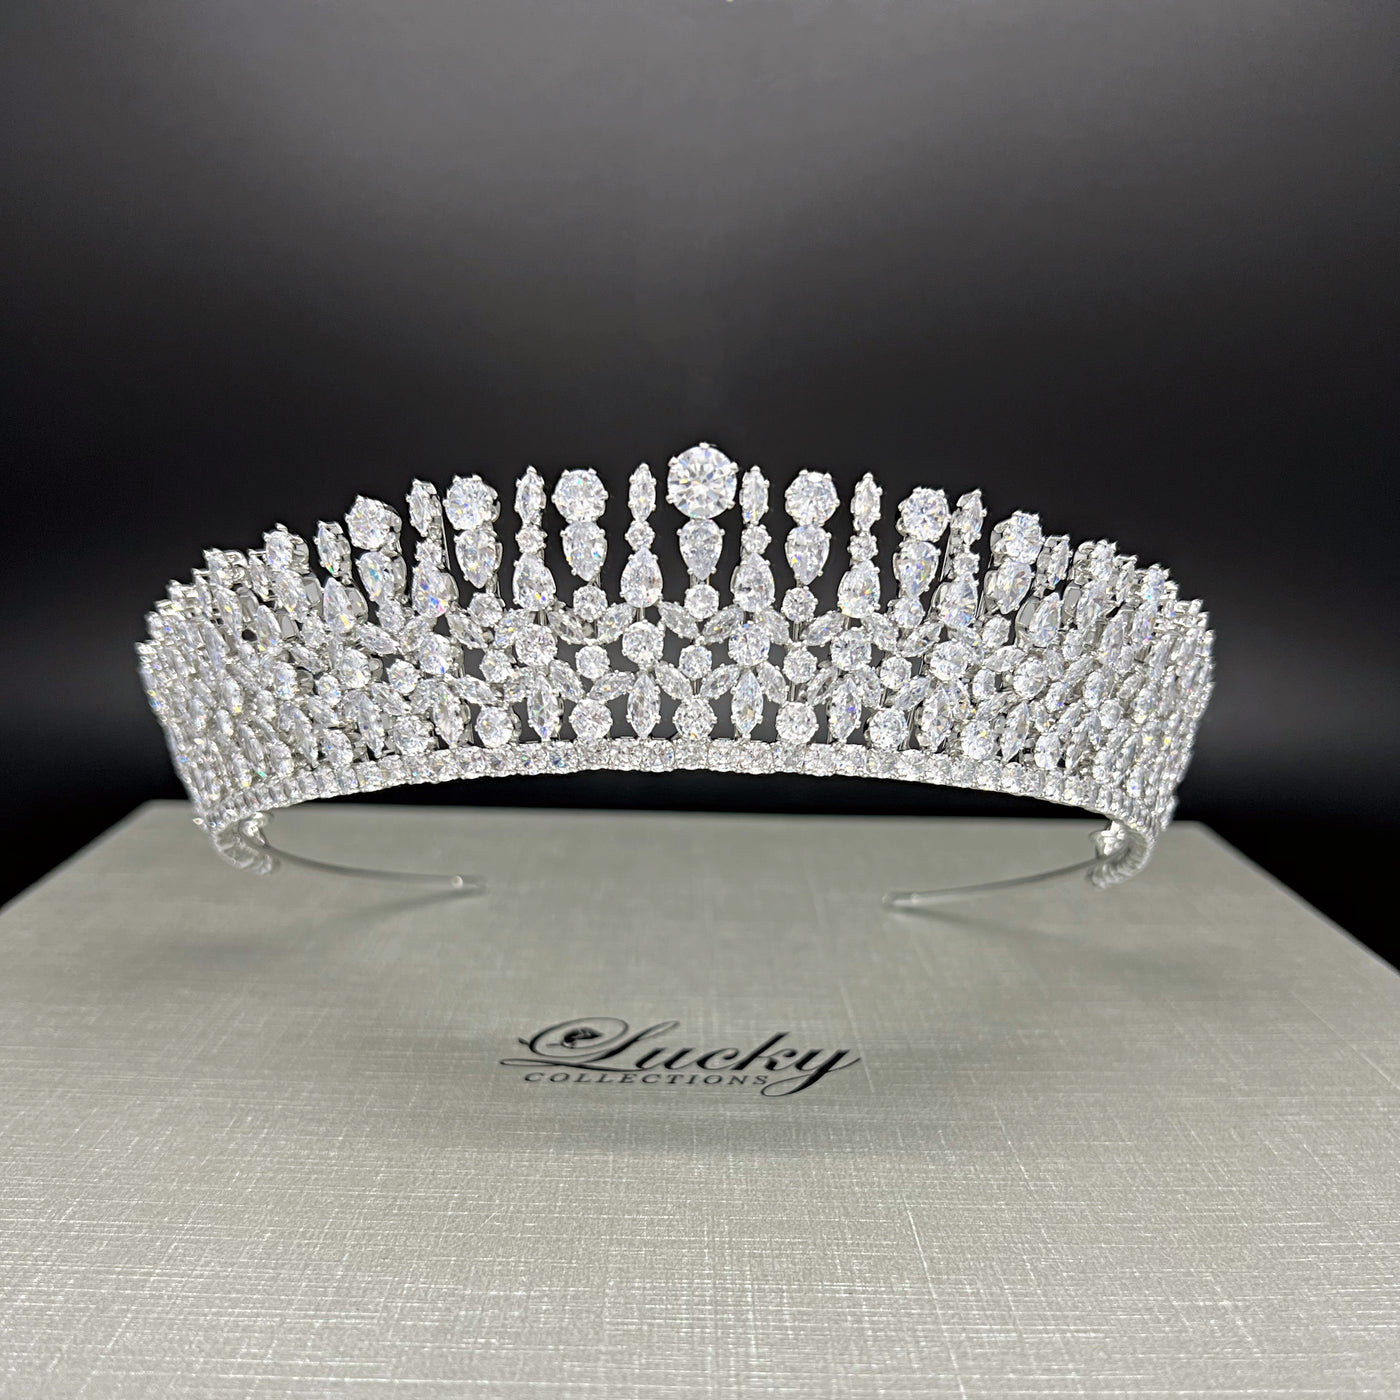 Showcase Cubic Zirconia Tiara made for diva withing